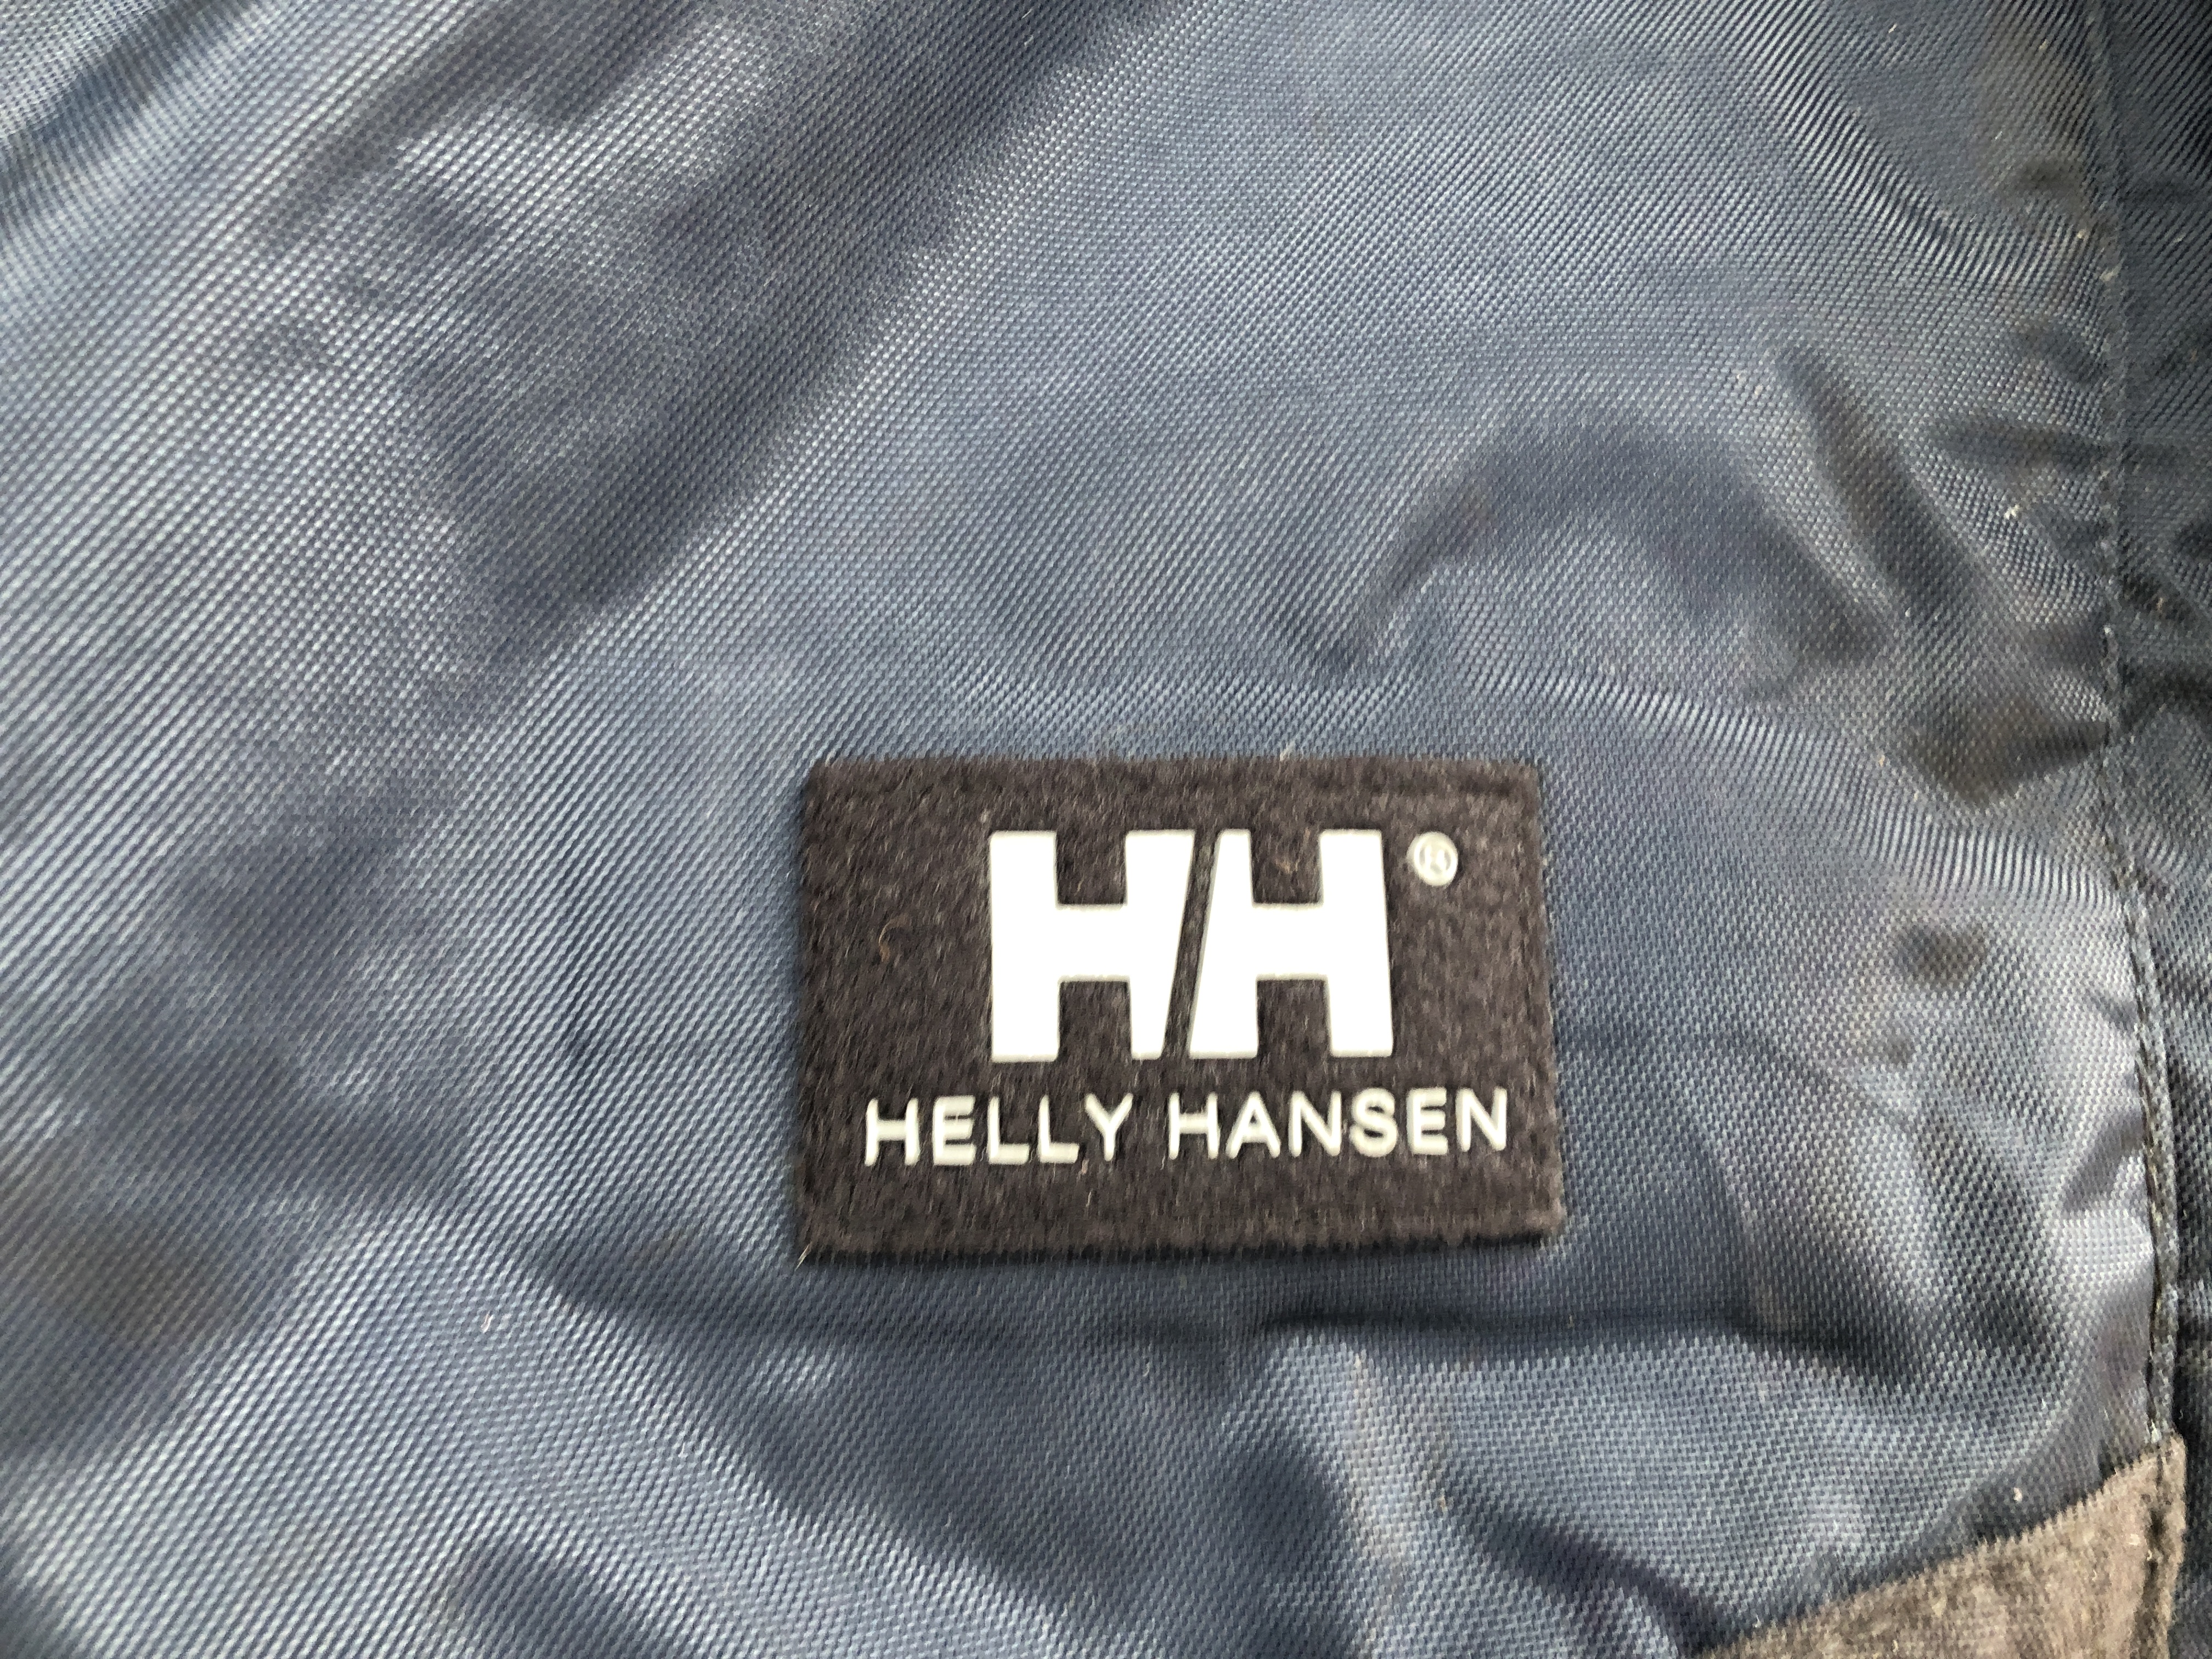 A HELLY HANSEN JACKET AND TROUSERS, JACKET SIZE SMALL, - Image 2 of 4